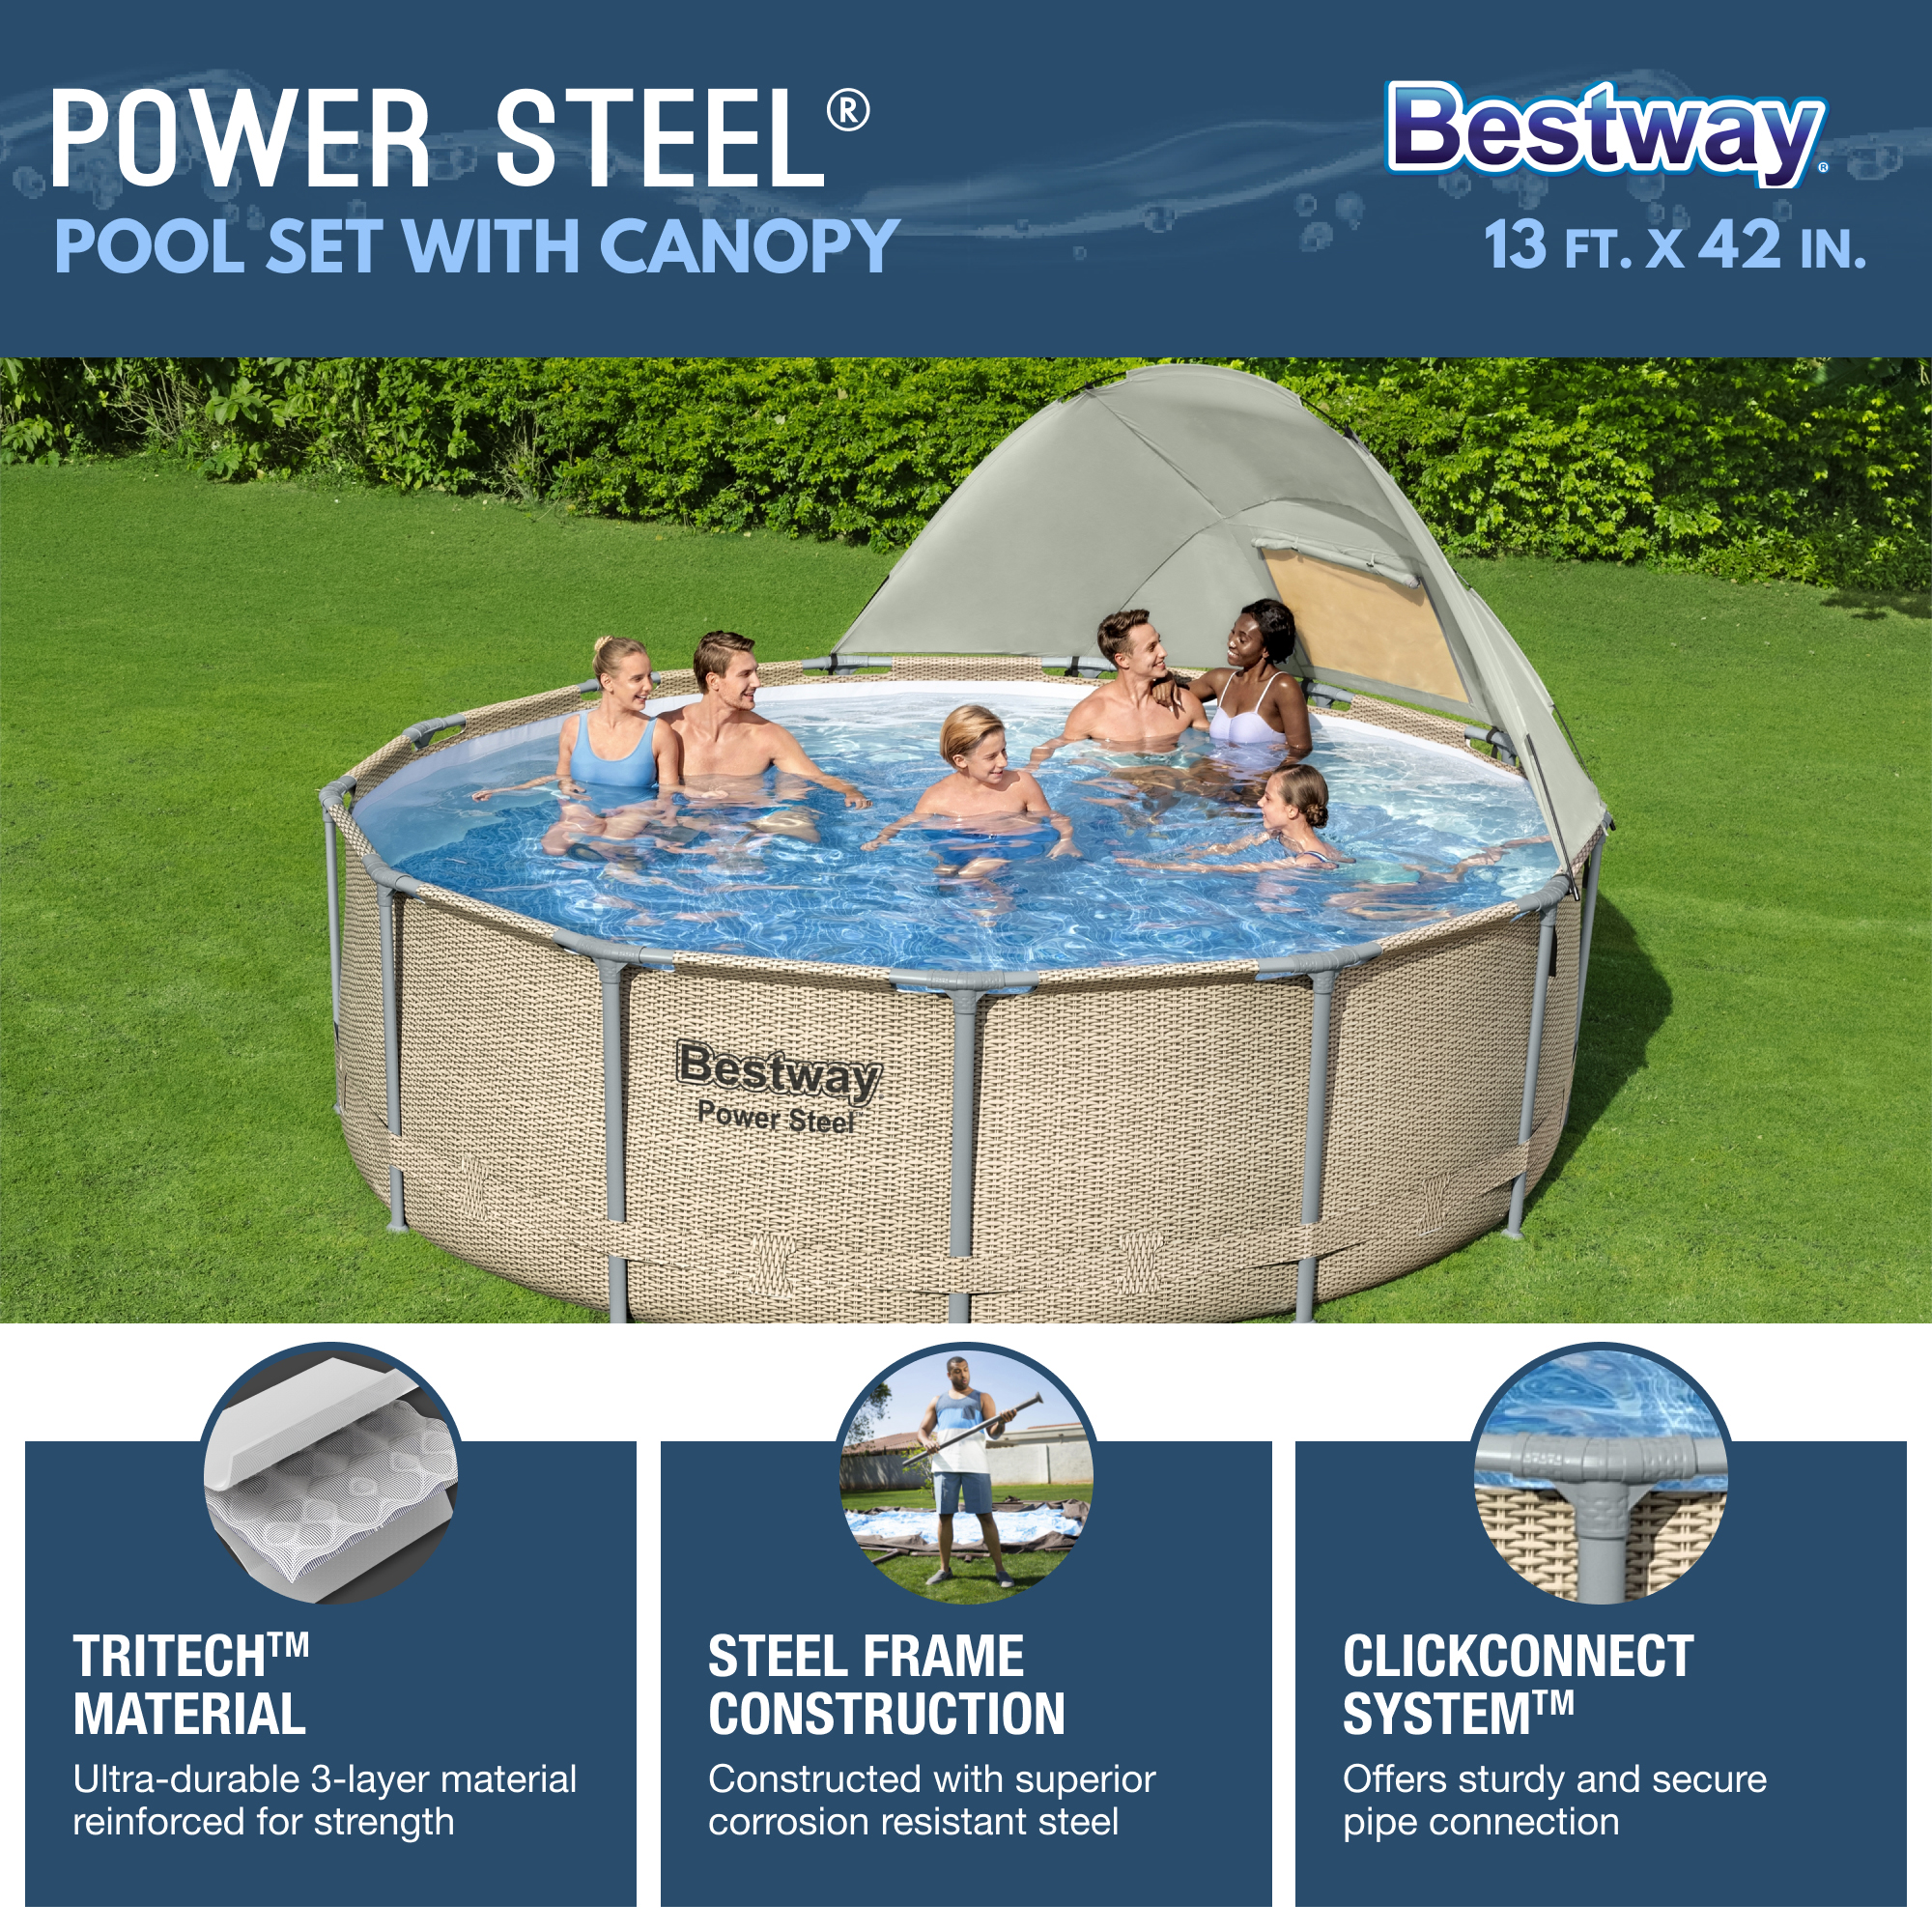 Bestway Power Steel 13' x 42" Above Ground Swimming Pool Set with Canopy - image 2 of 12